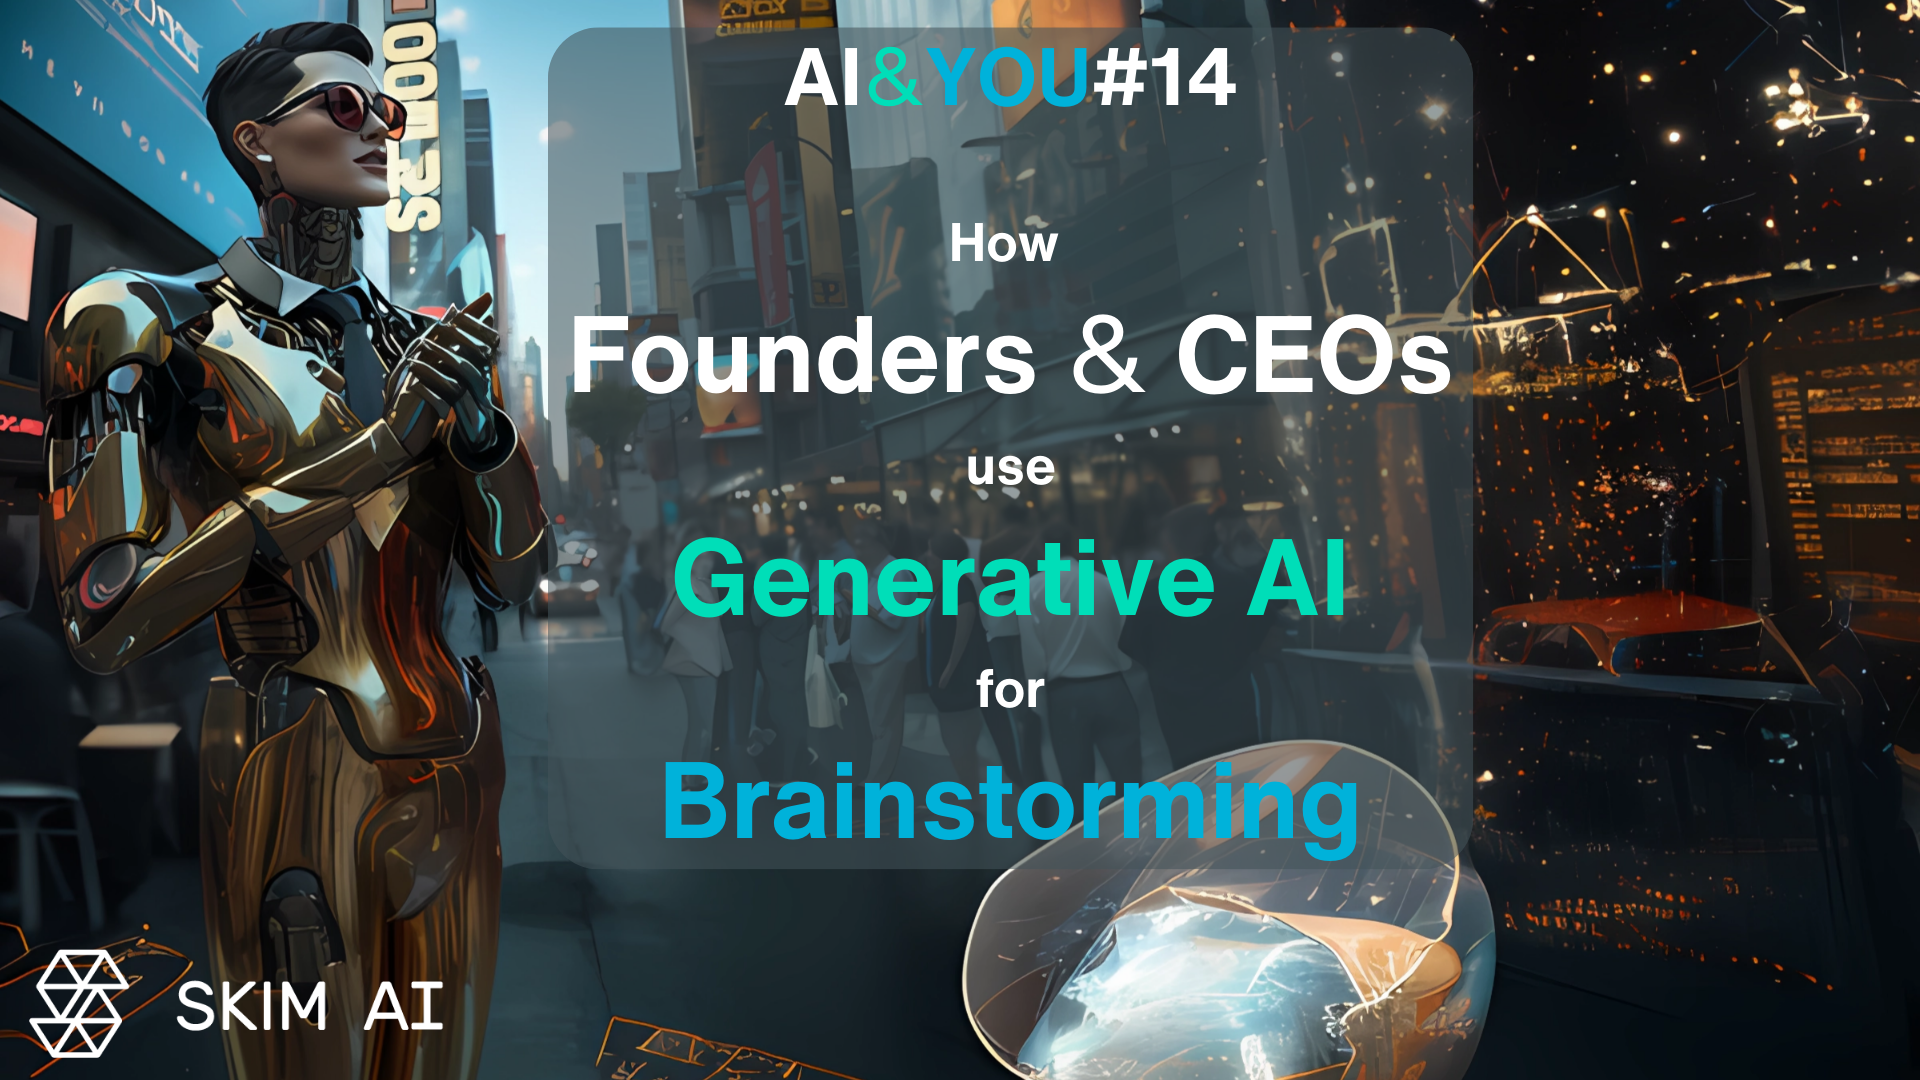 AI & YOU #14: How Founders (& you) use Generative AI for Brainstorming